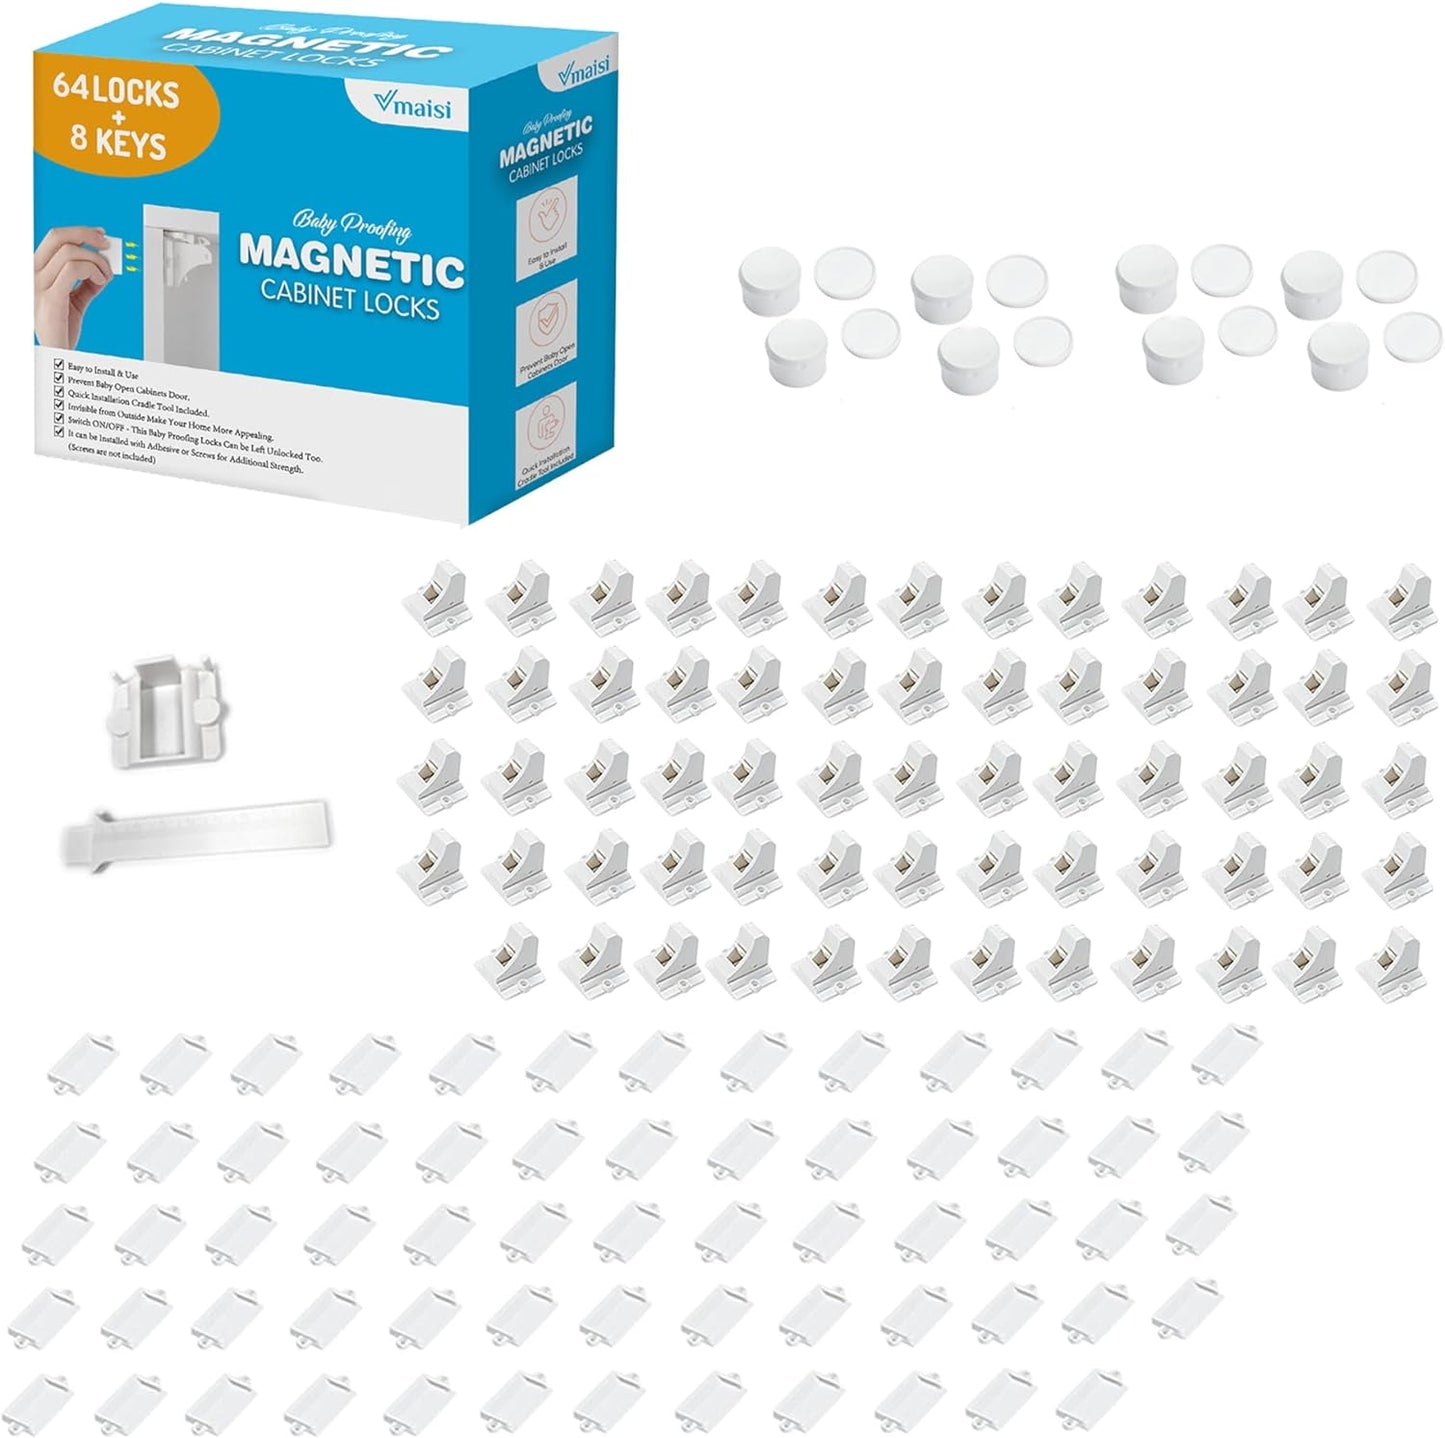 20 Pack Magnetic Cabinet Locks Baby Proofing - Vmaisi Children Proof Cupboard Drawers Latches - Adhesive Easy Installation